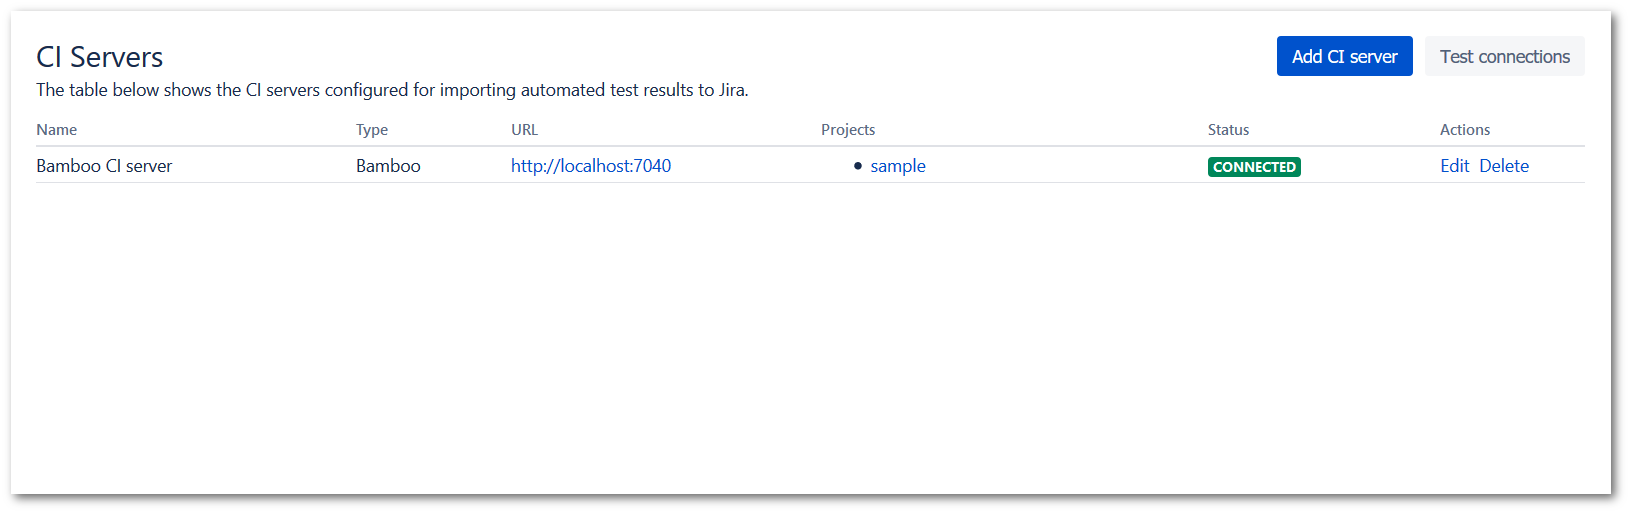 Bamboo CI server configuration in TestFLO - Test Management for Jira